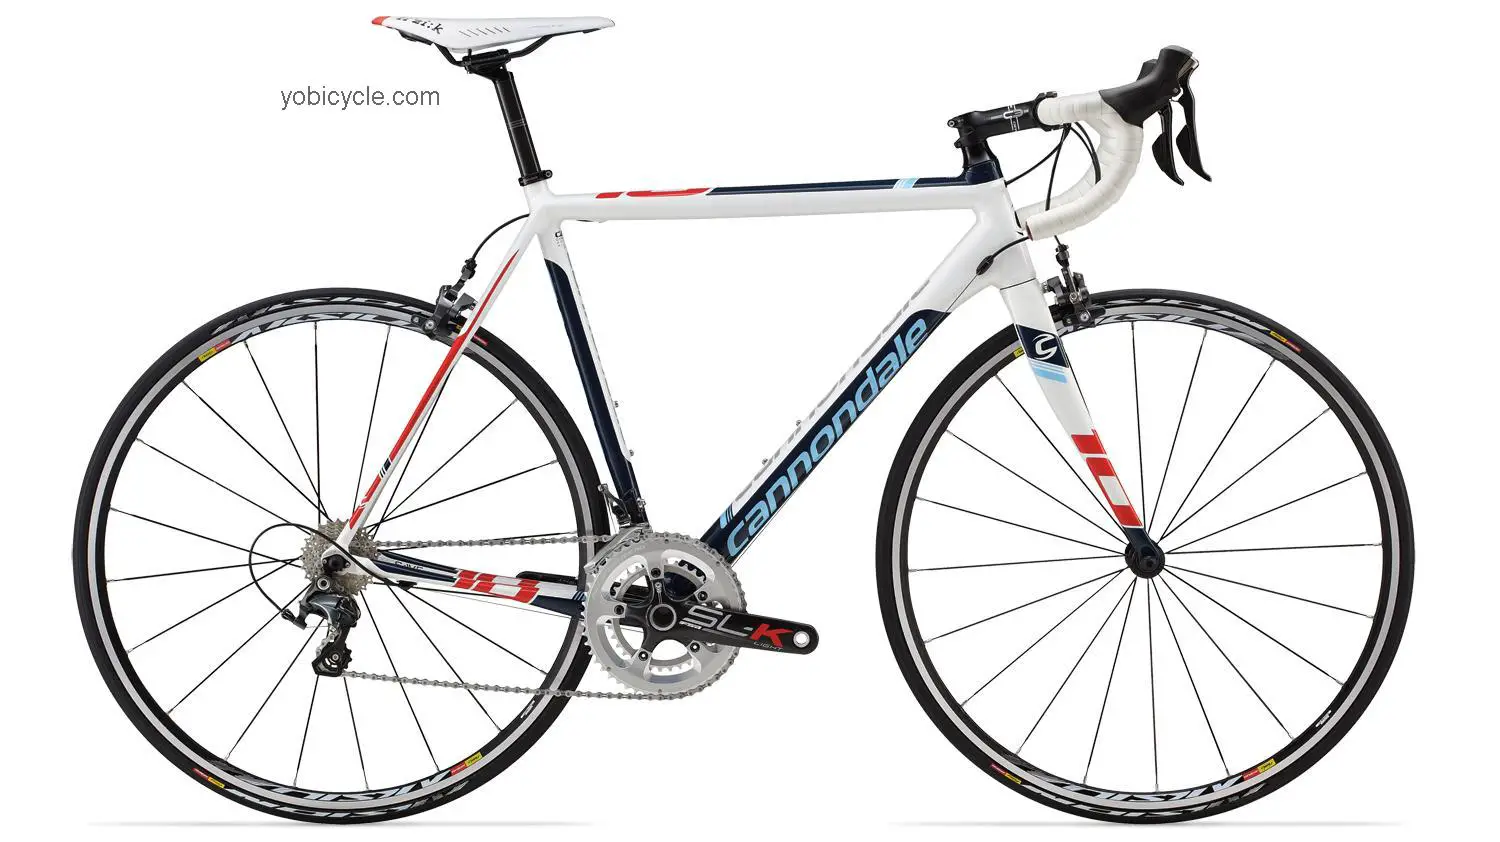 Cannondale CAAD10 3 Ultegra Double 2014 comparison online with competitors